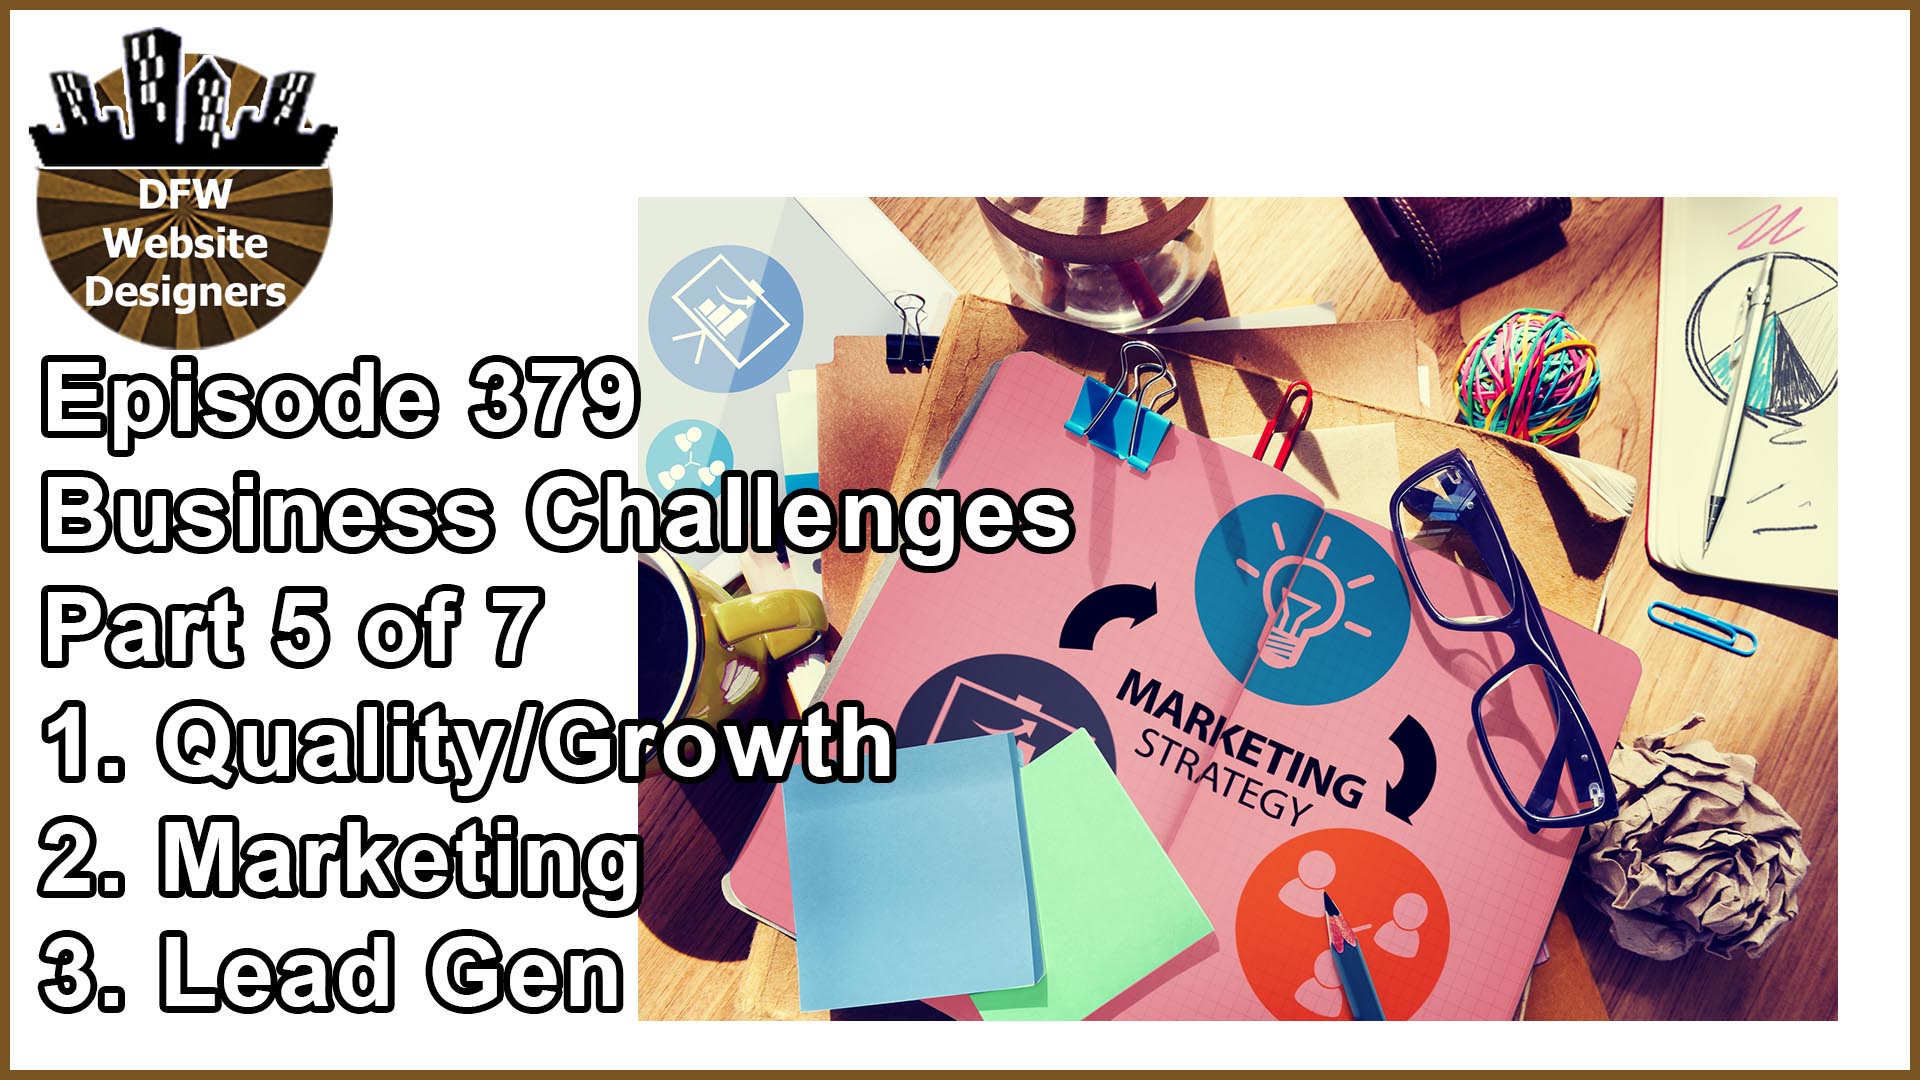 Episode 379 Business Challenges Pt5 Quality/Growth, Marketing, Lead Gen